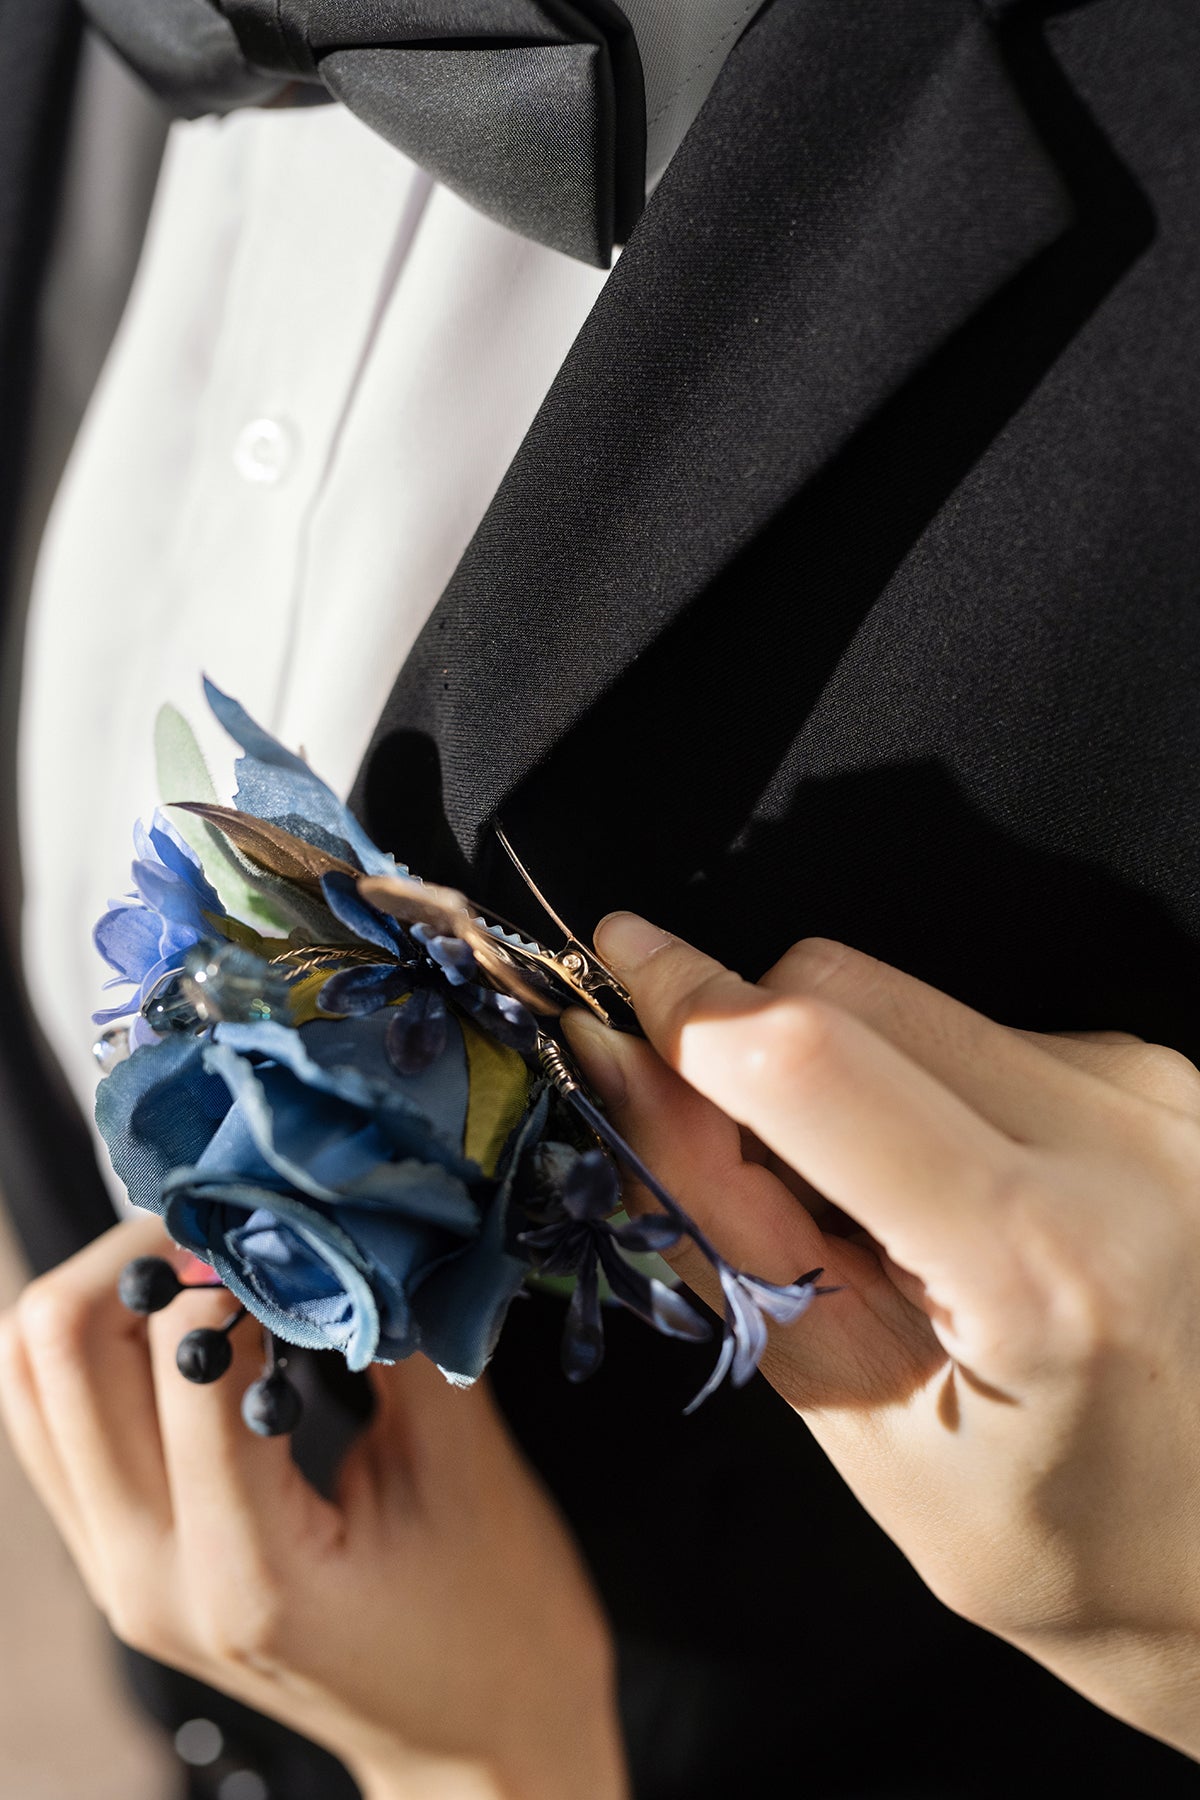 Flash Sale | Pocket Square Boutonniere for Groom in Dusty Rose & Navy